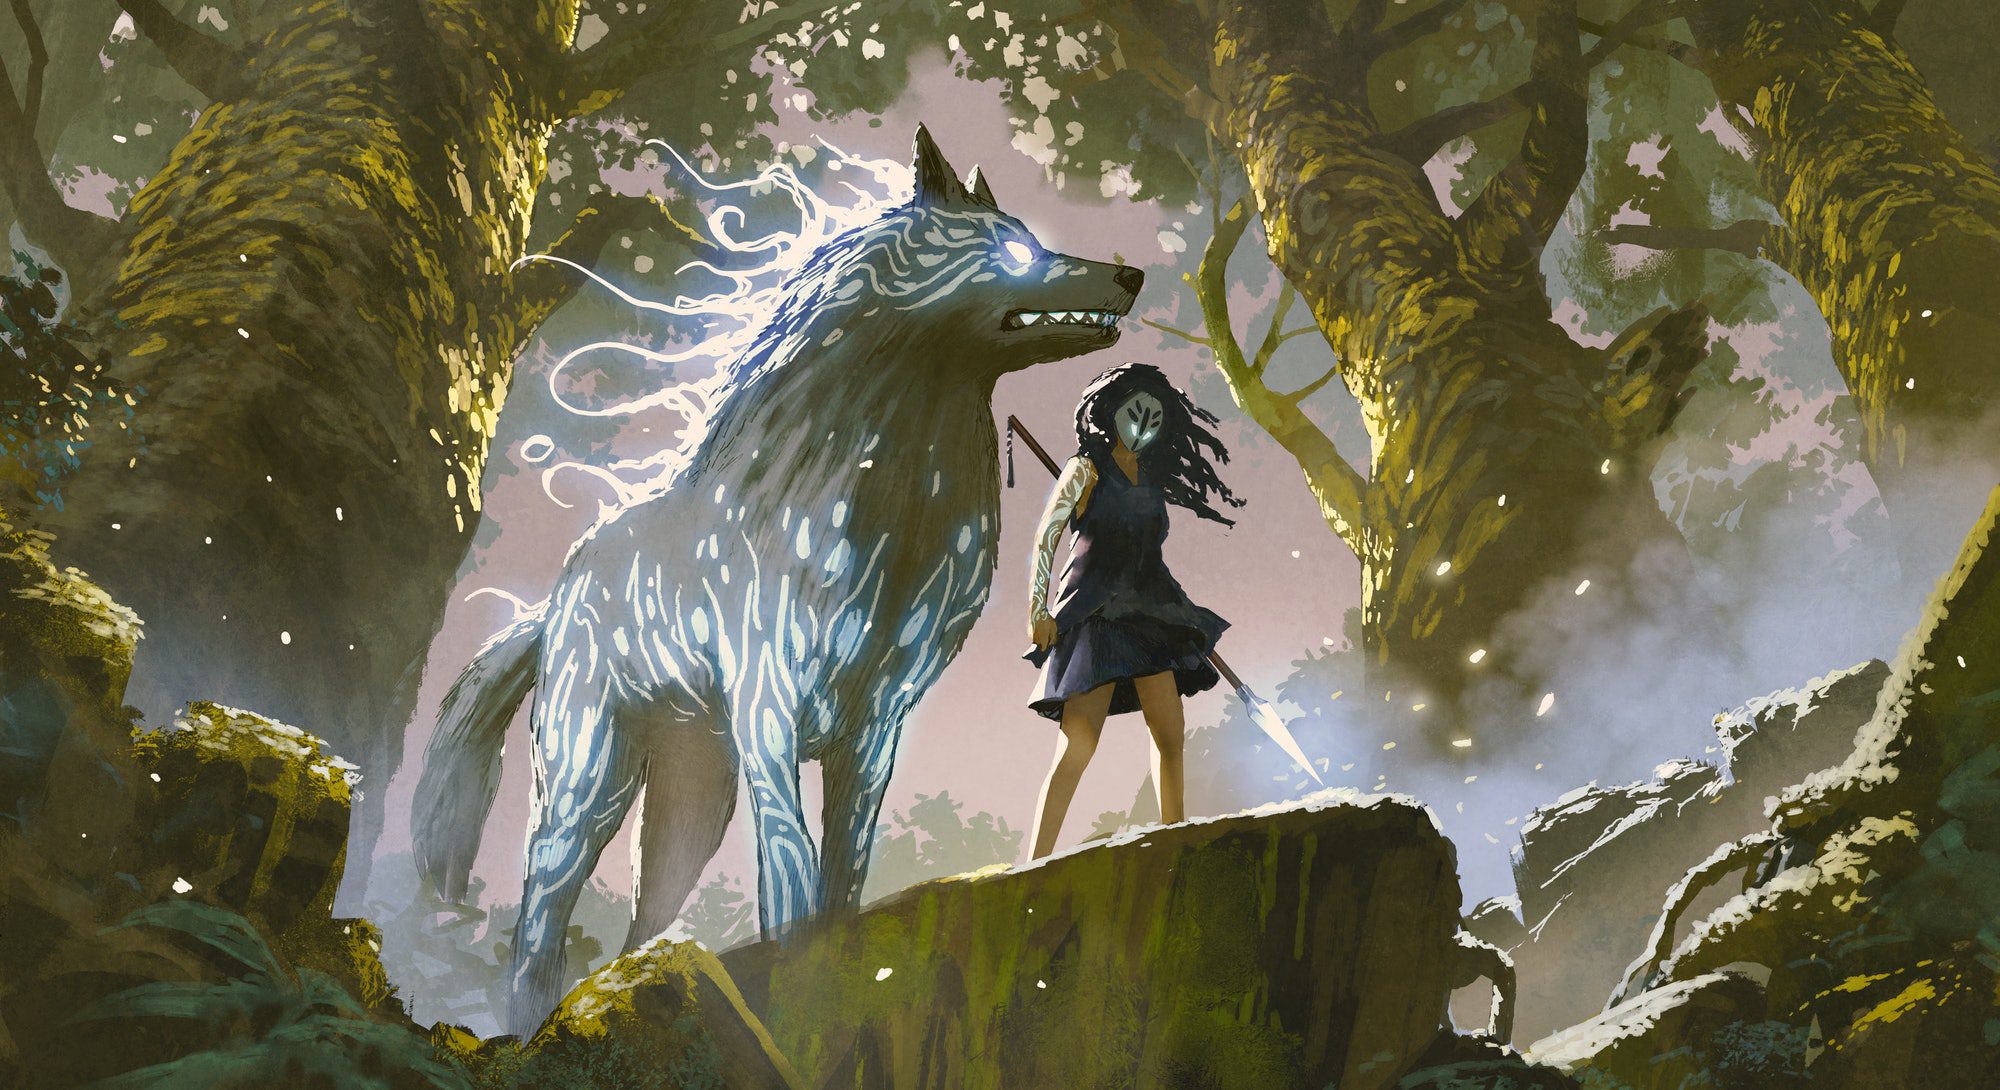 The Wild Beyond the Witchlight wolf art